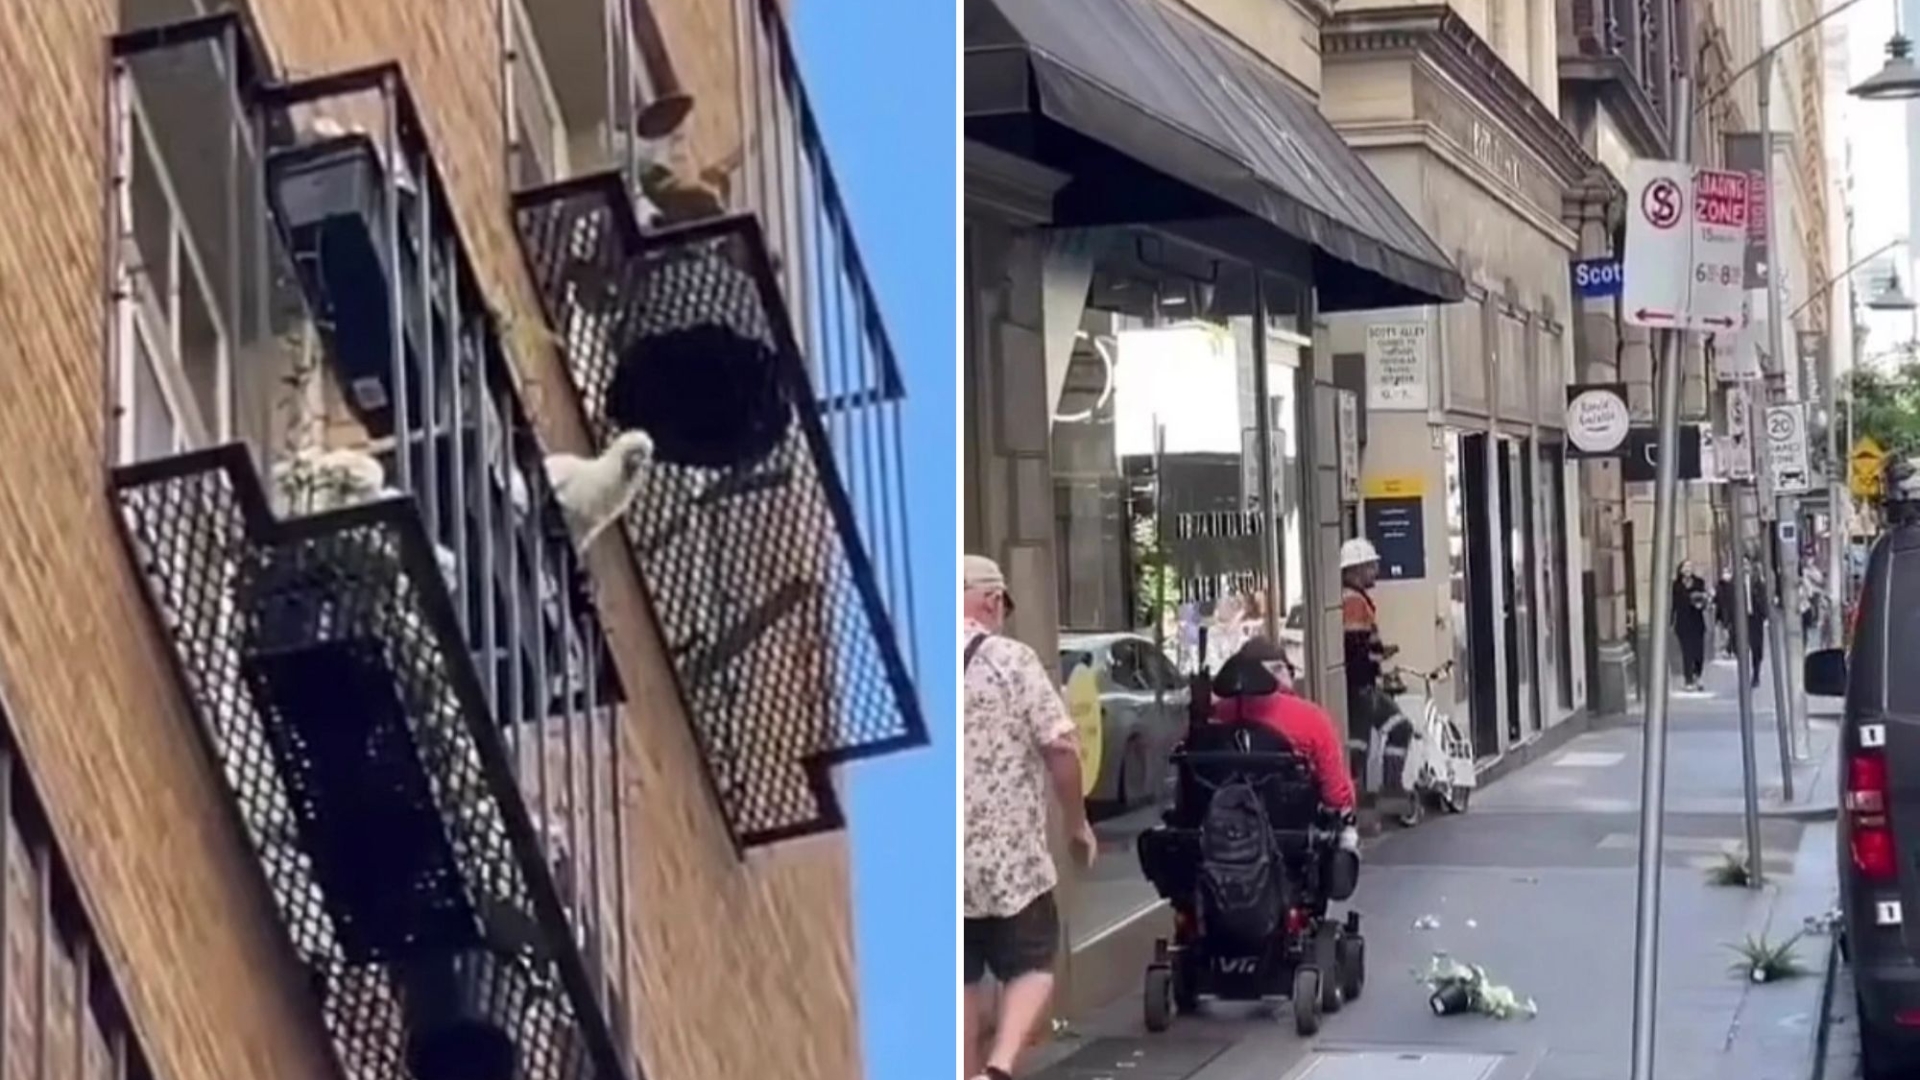 See how the cockatoo intentionally pushes a plant plot out of an apartment balcony. It crashes onto busy pavement.